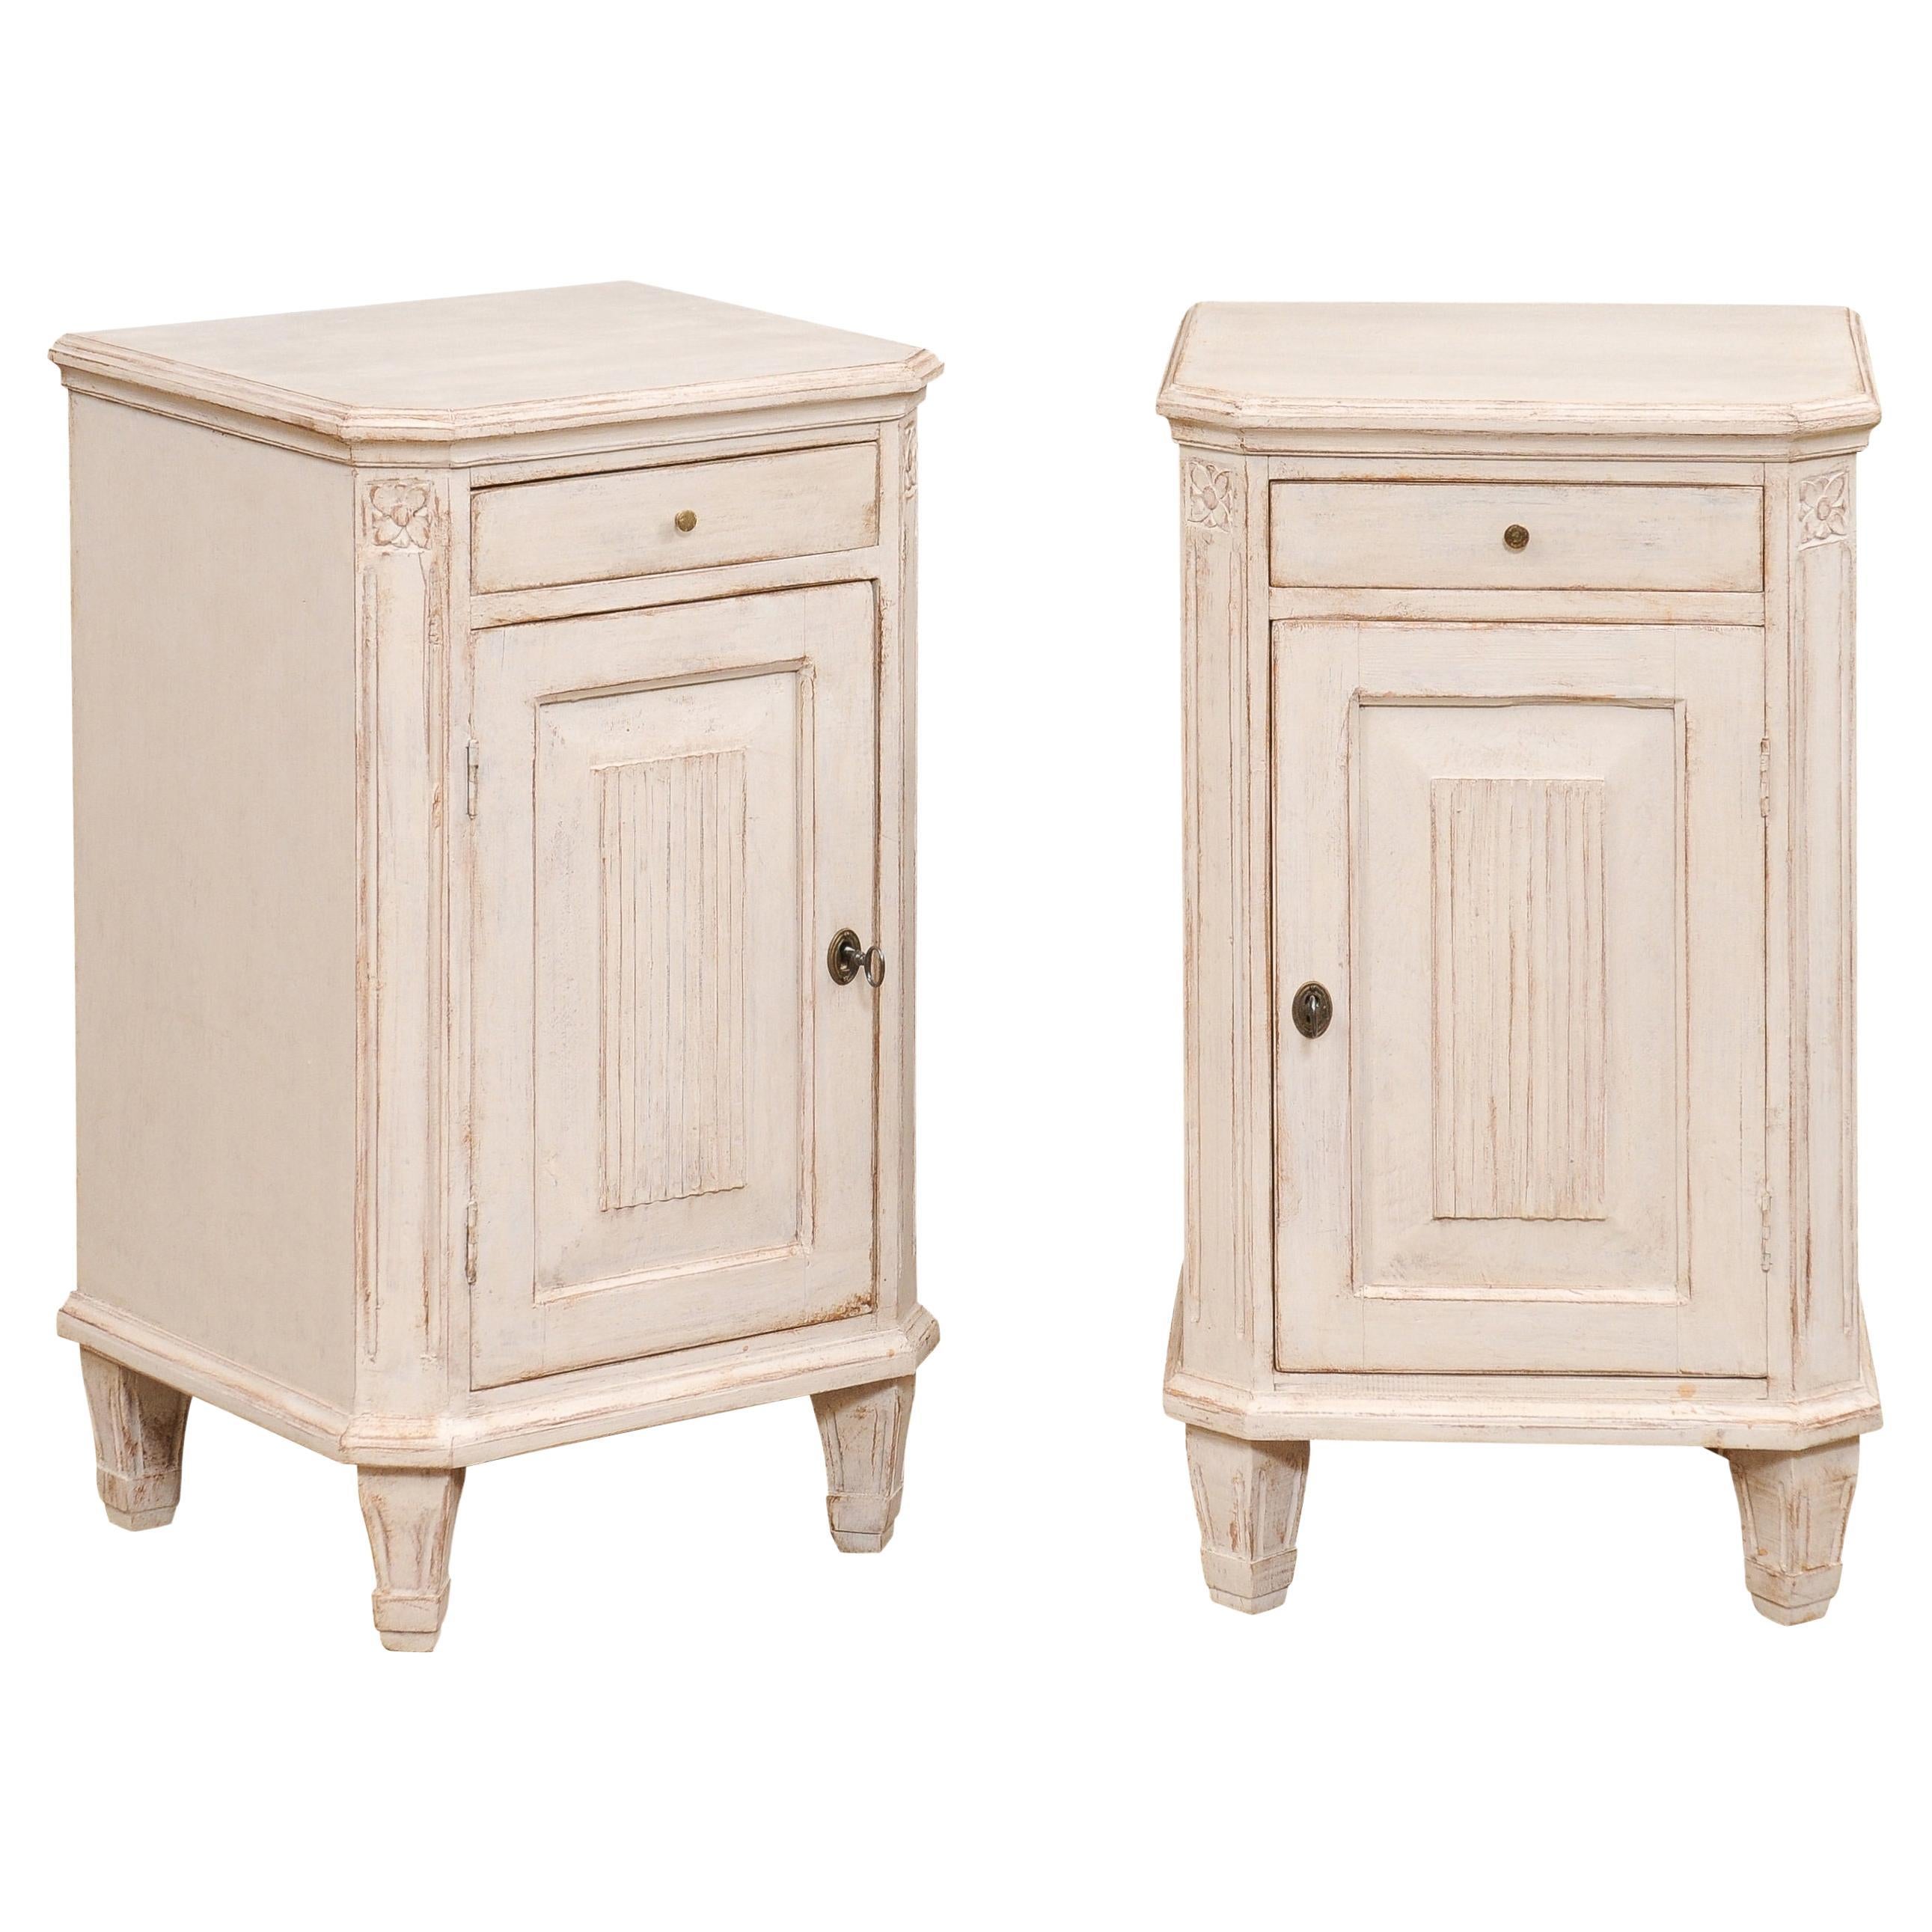 Pair of Swedish Gustavian Style 19th Century Painted Wood Nightstands Tables